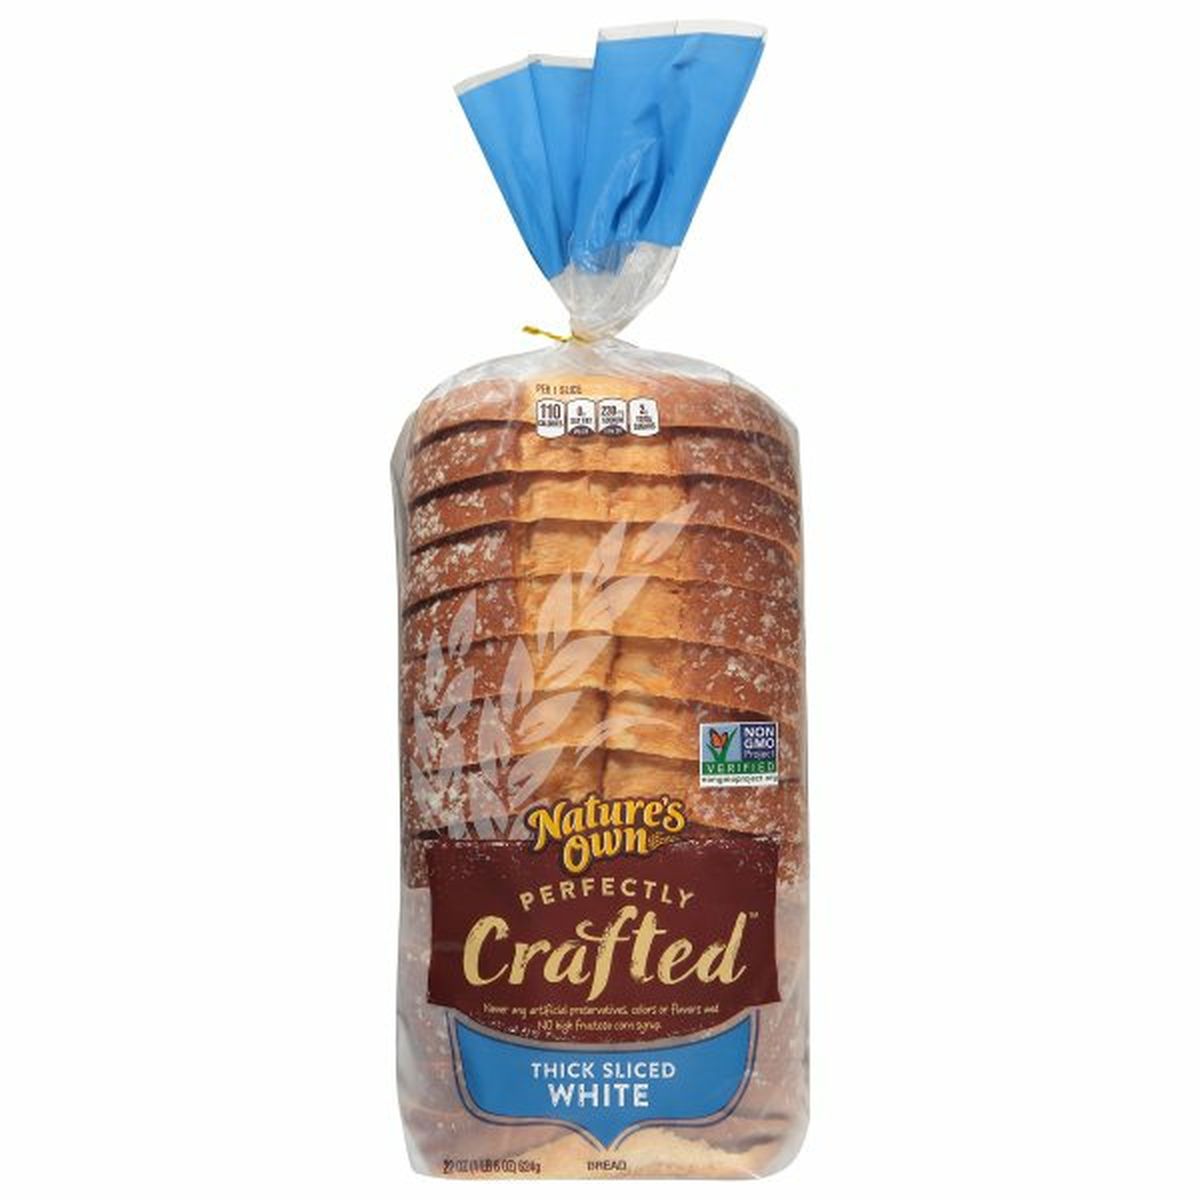 Calories in Nature's Own Perfectly Crafted Bread, White, Thick Sliced